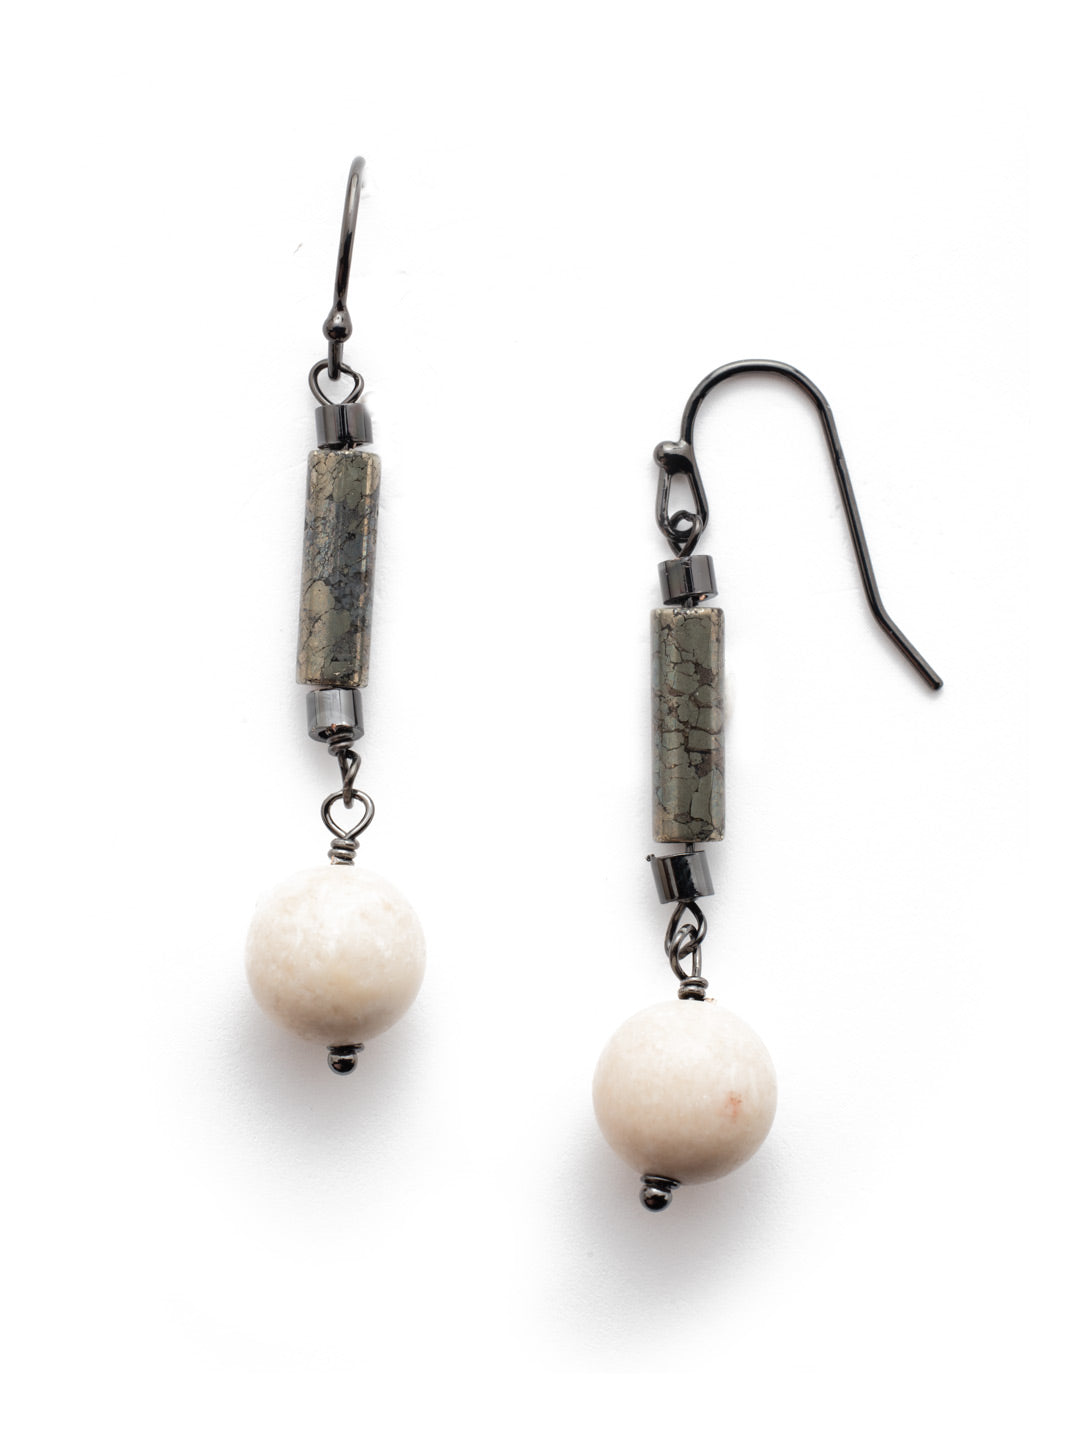 Perry Dangle Earrings - EEU80GMGNS - For the lover of earth tones and things that harken to nature, grab our Perry Dangle Earrings. Their beadwork is simple, yet stunning. From Sorrelli's Golden Shadow collection in our Gun Metal finish.